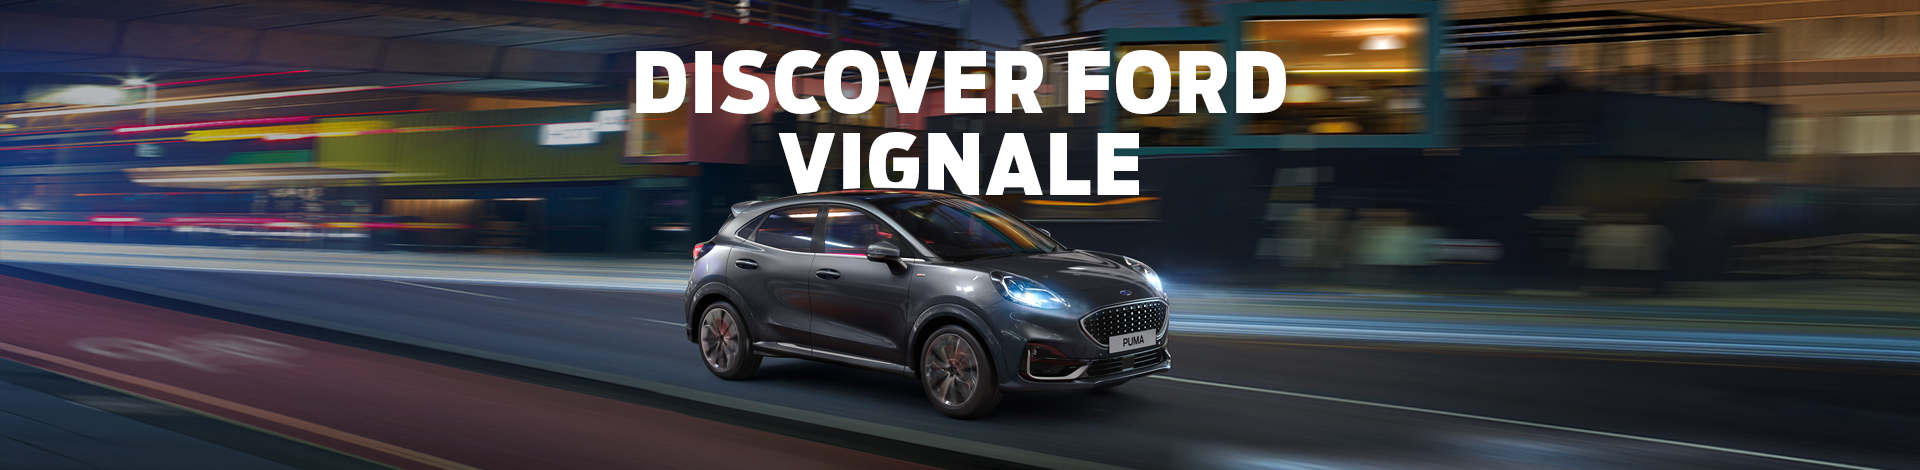 /ford/vignale (Always on banner)